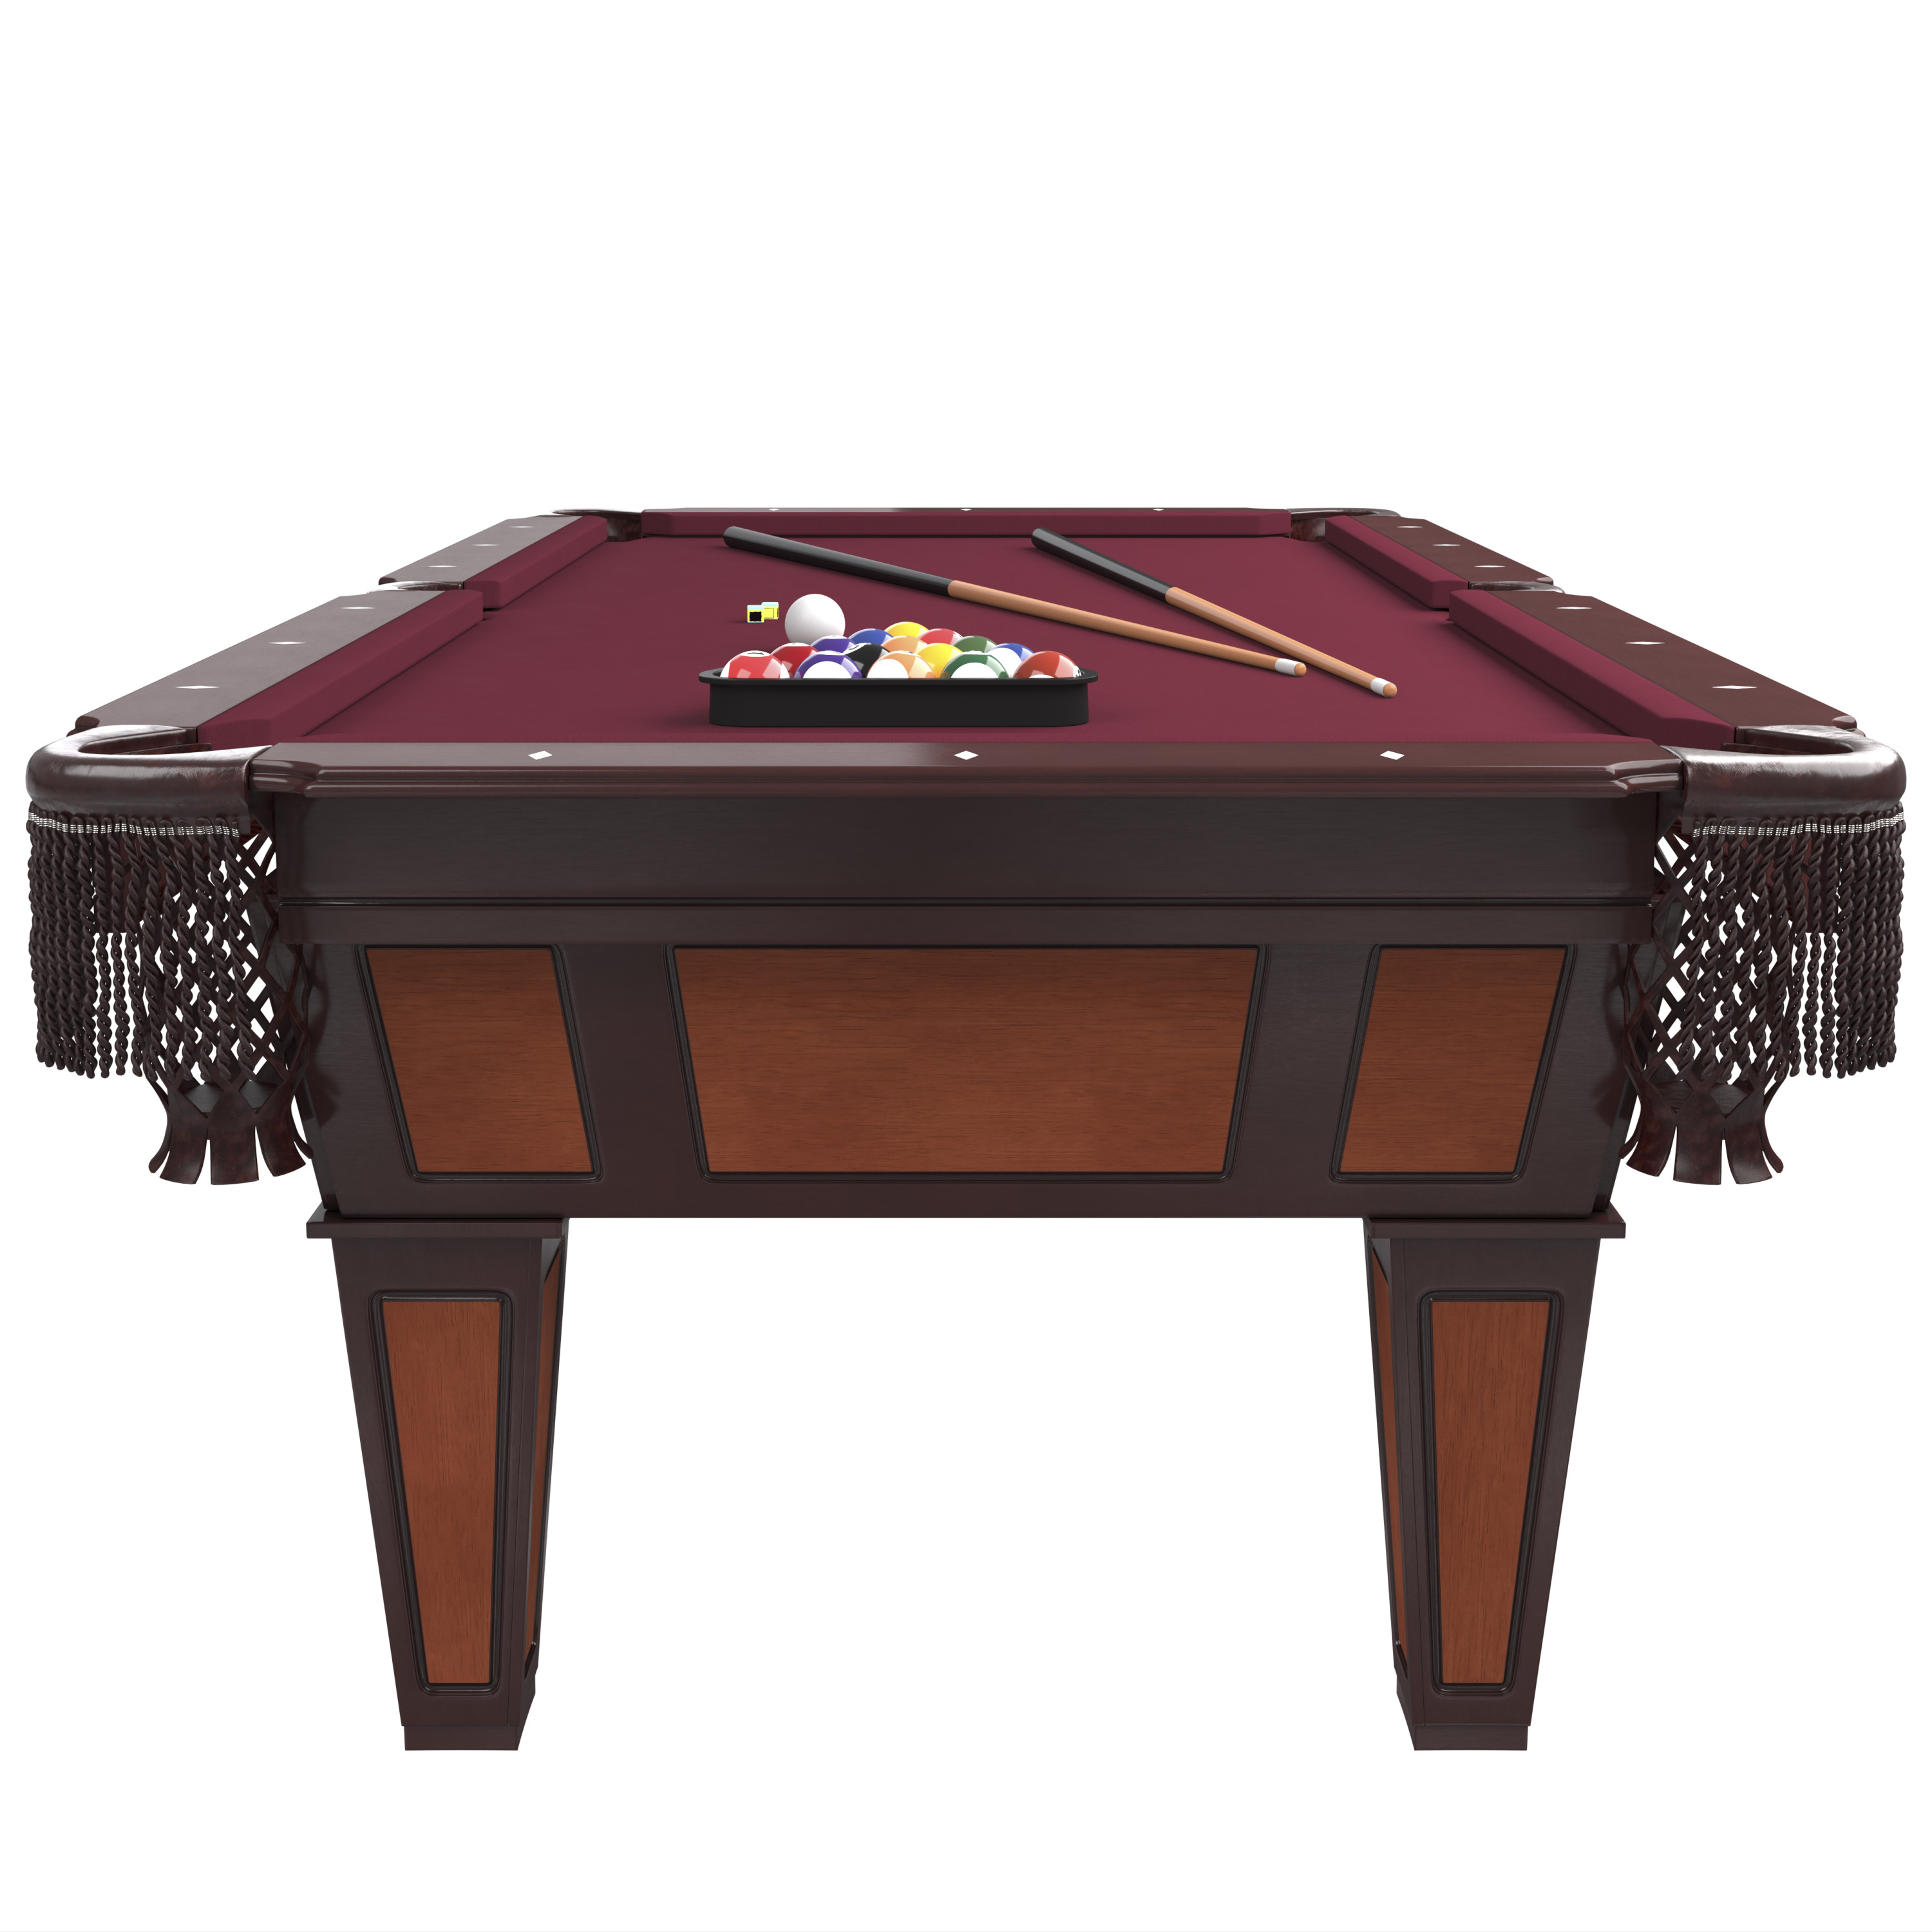 Fat Cat Reno 7.5' Pool Table with Pool Cues and Accessories - image 2 of 13